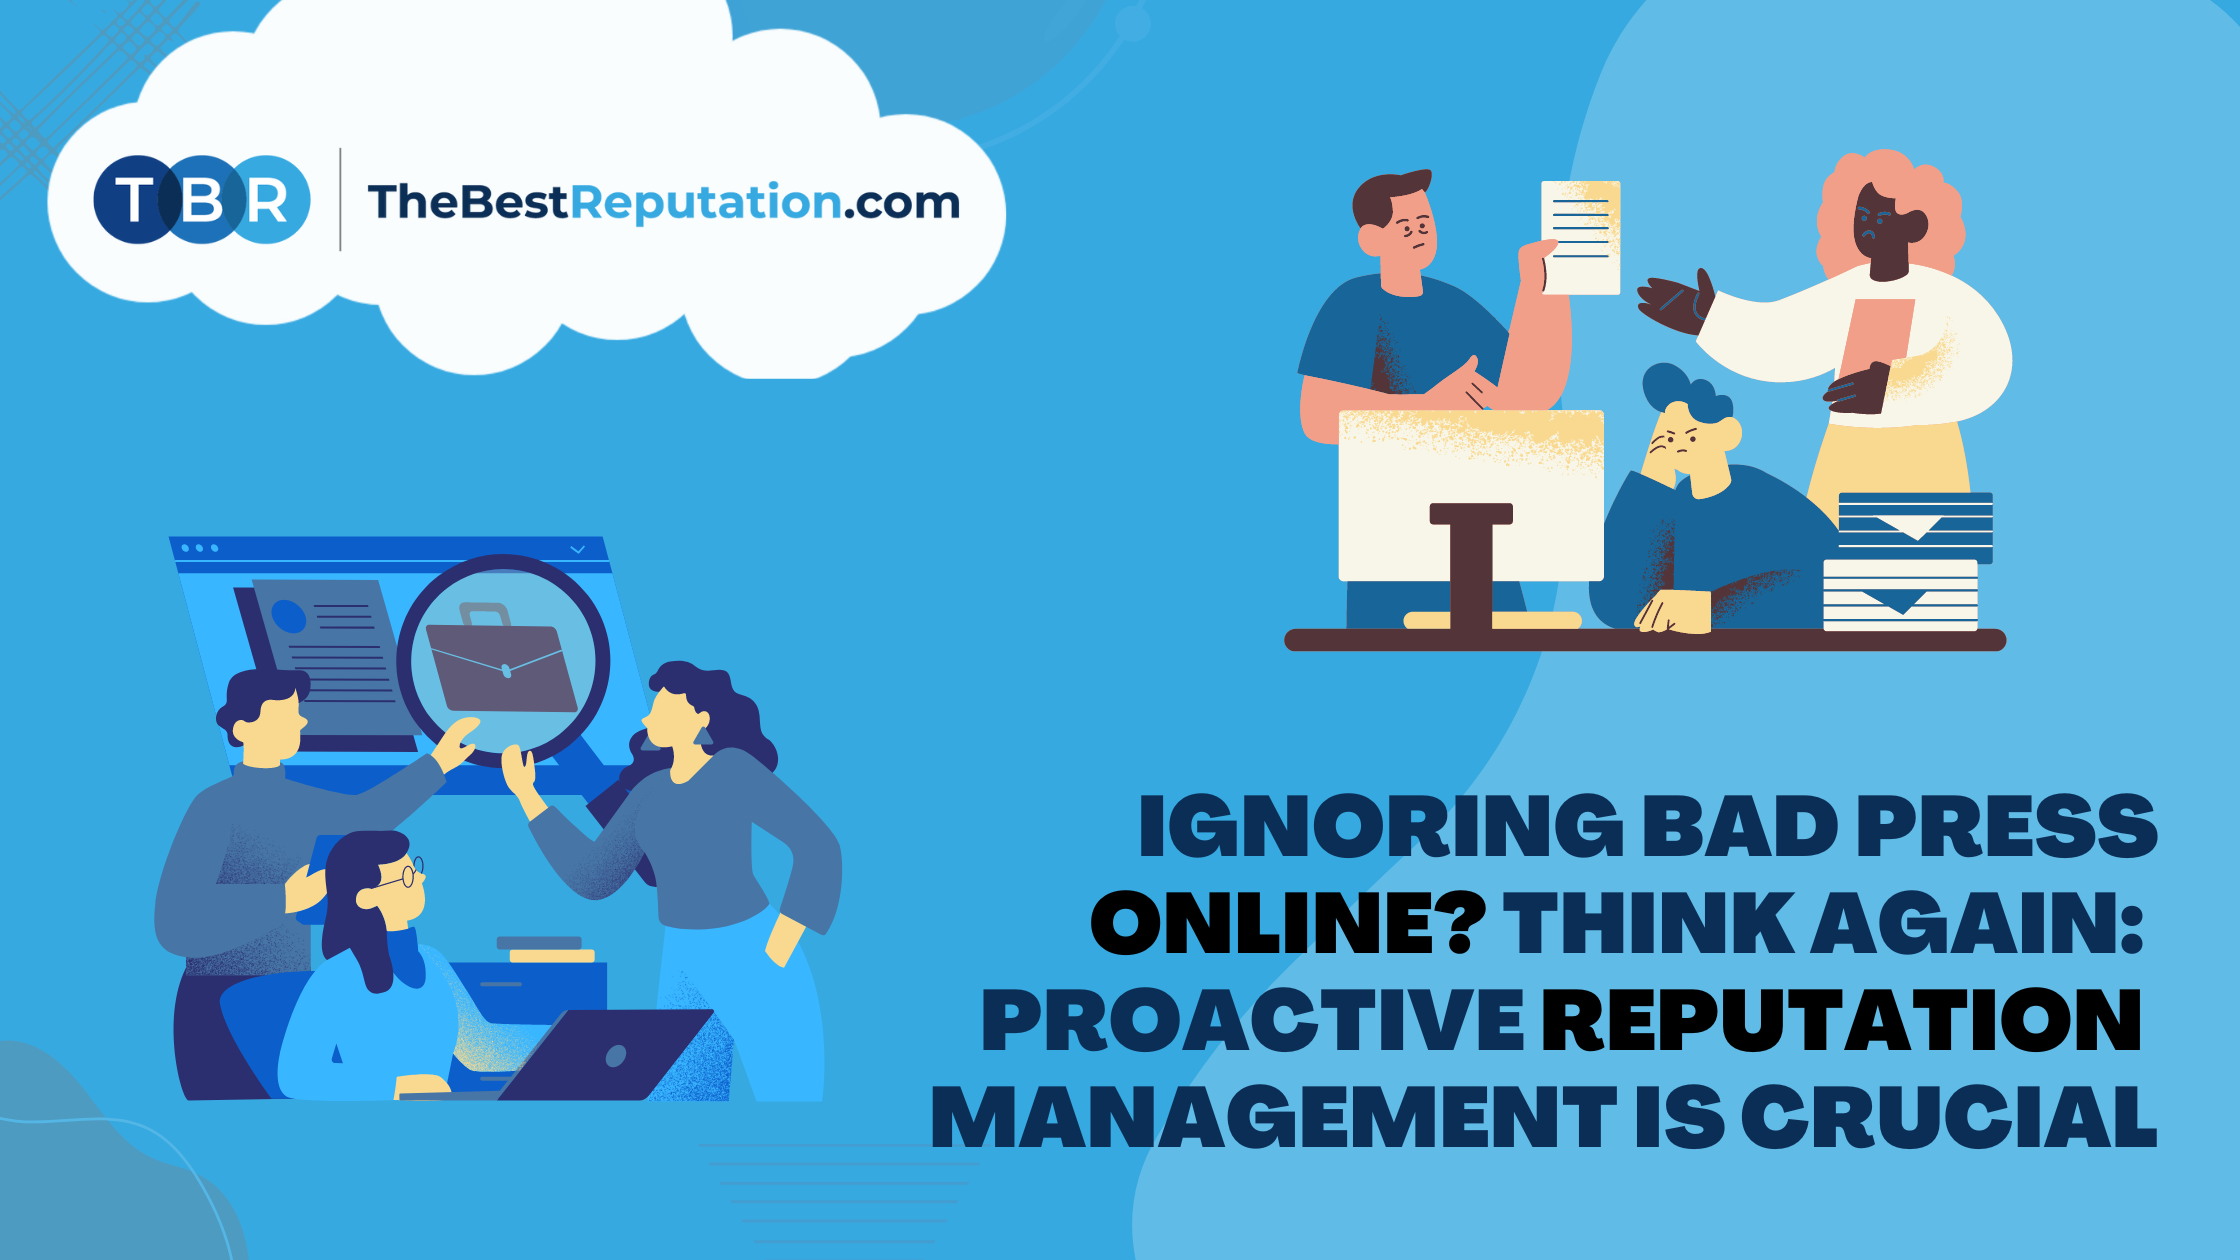 Ignoring Bad Press Online? Think Again: TBR Explains Why Proactive Reputation Management is Crucial